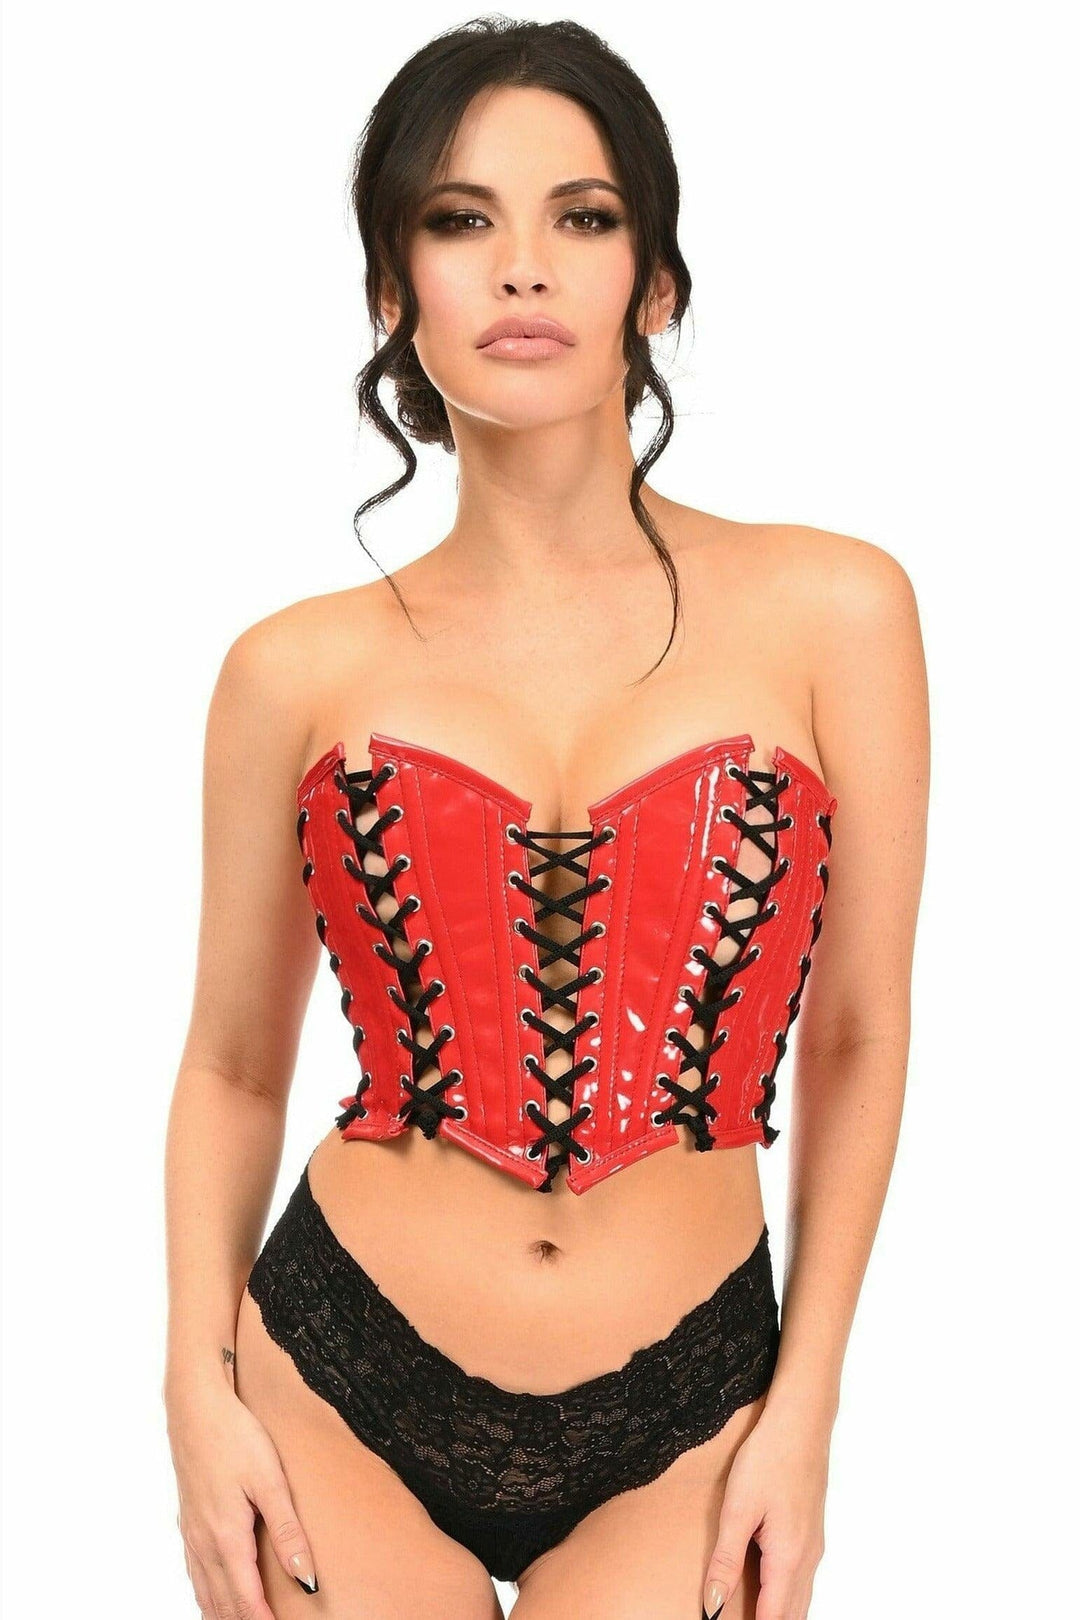 Lavish Red Patent w/Black Lacing Lace-Up Bustier-Bustier Corsets-Daisy Corsets-Red-S-SEXYSHOES.COM